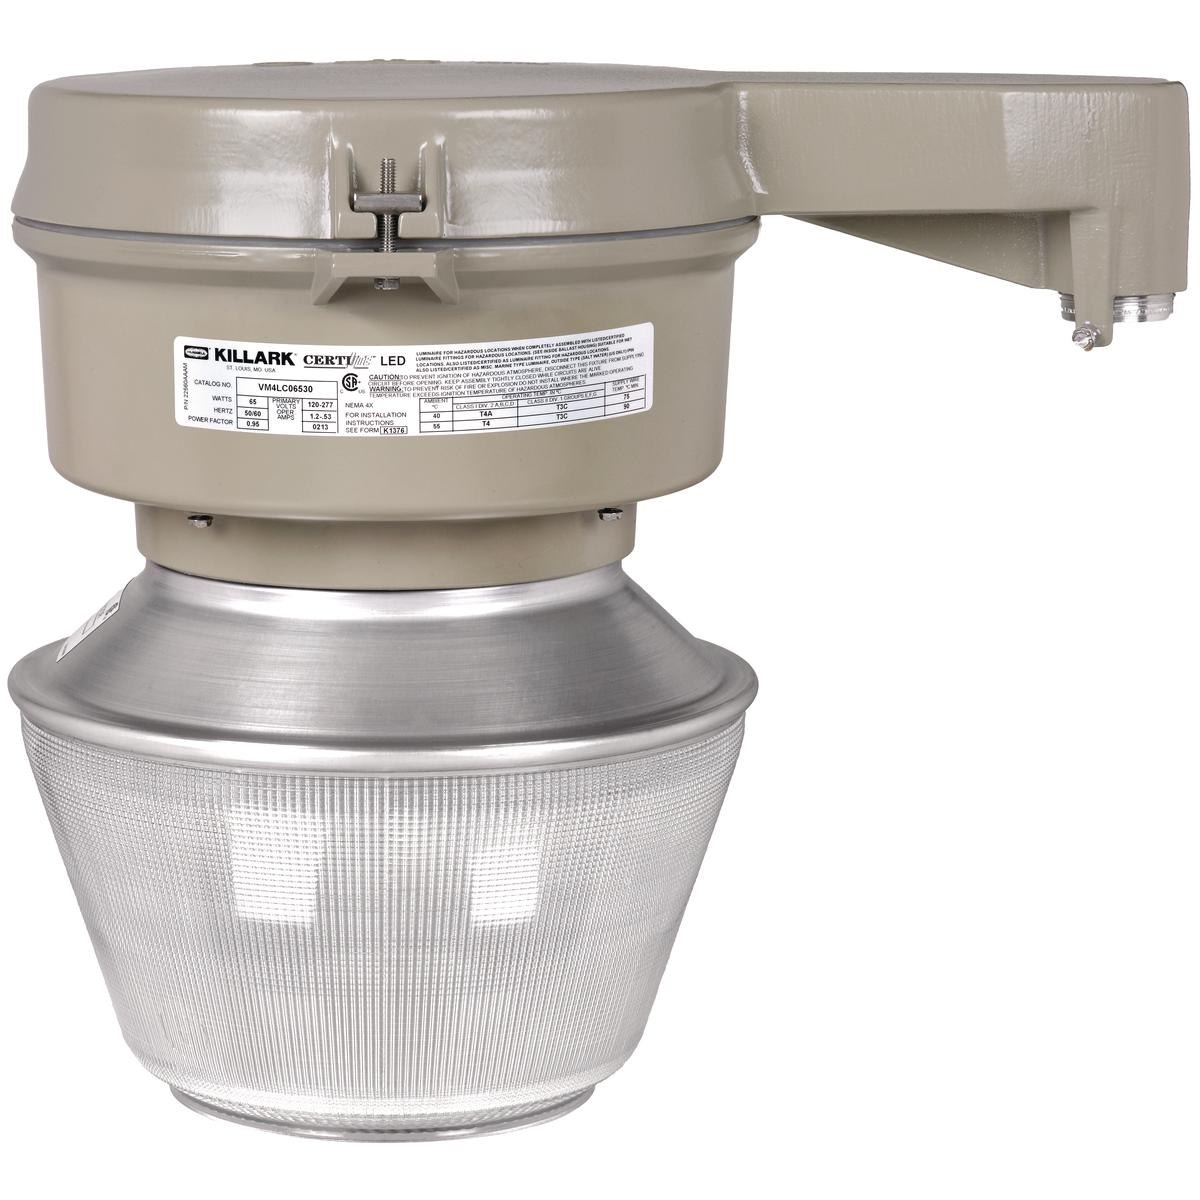 Hubbell VM4LC930S5P5 VM4LC 120-277V 1-1/2" Straight Stanchion Mount Polycarbonate Spin-Top Type 5 Refractor with Guard  ; Supplemental 20KA/10KV Surge Protection is standard for 120-277 VAC models & 10KA/10KV Surge Protection is standard for 347-480 VAC models. ; Traditional 